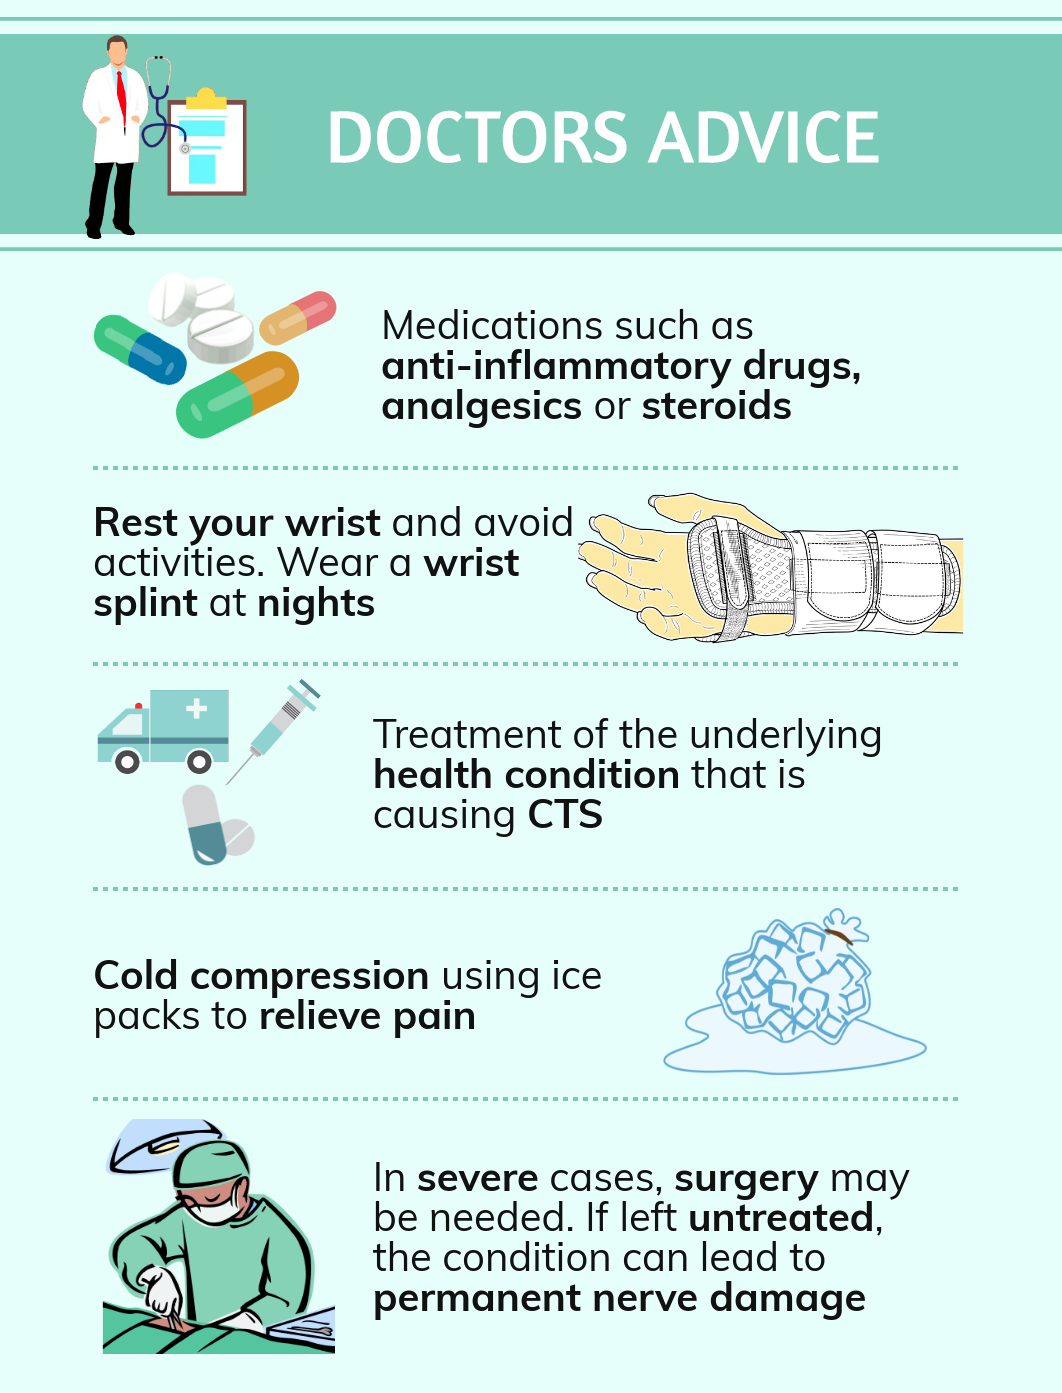 dr. know blog hey zindagi managing carpal tunnel syndrome doctor's advice infographic medication, wrist splint, treatment, ice pack, surgery